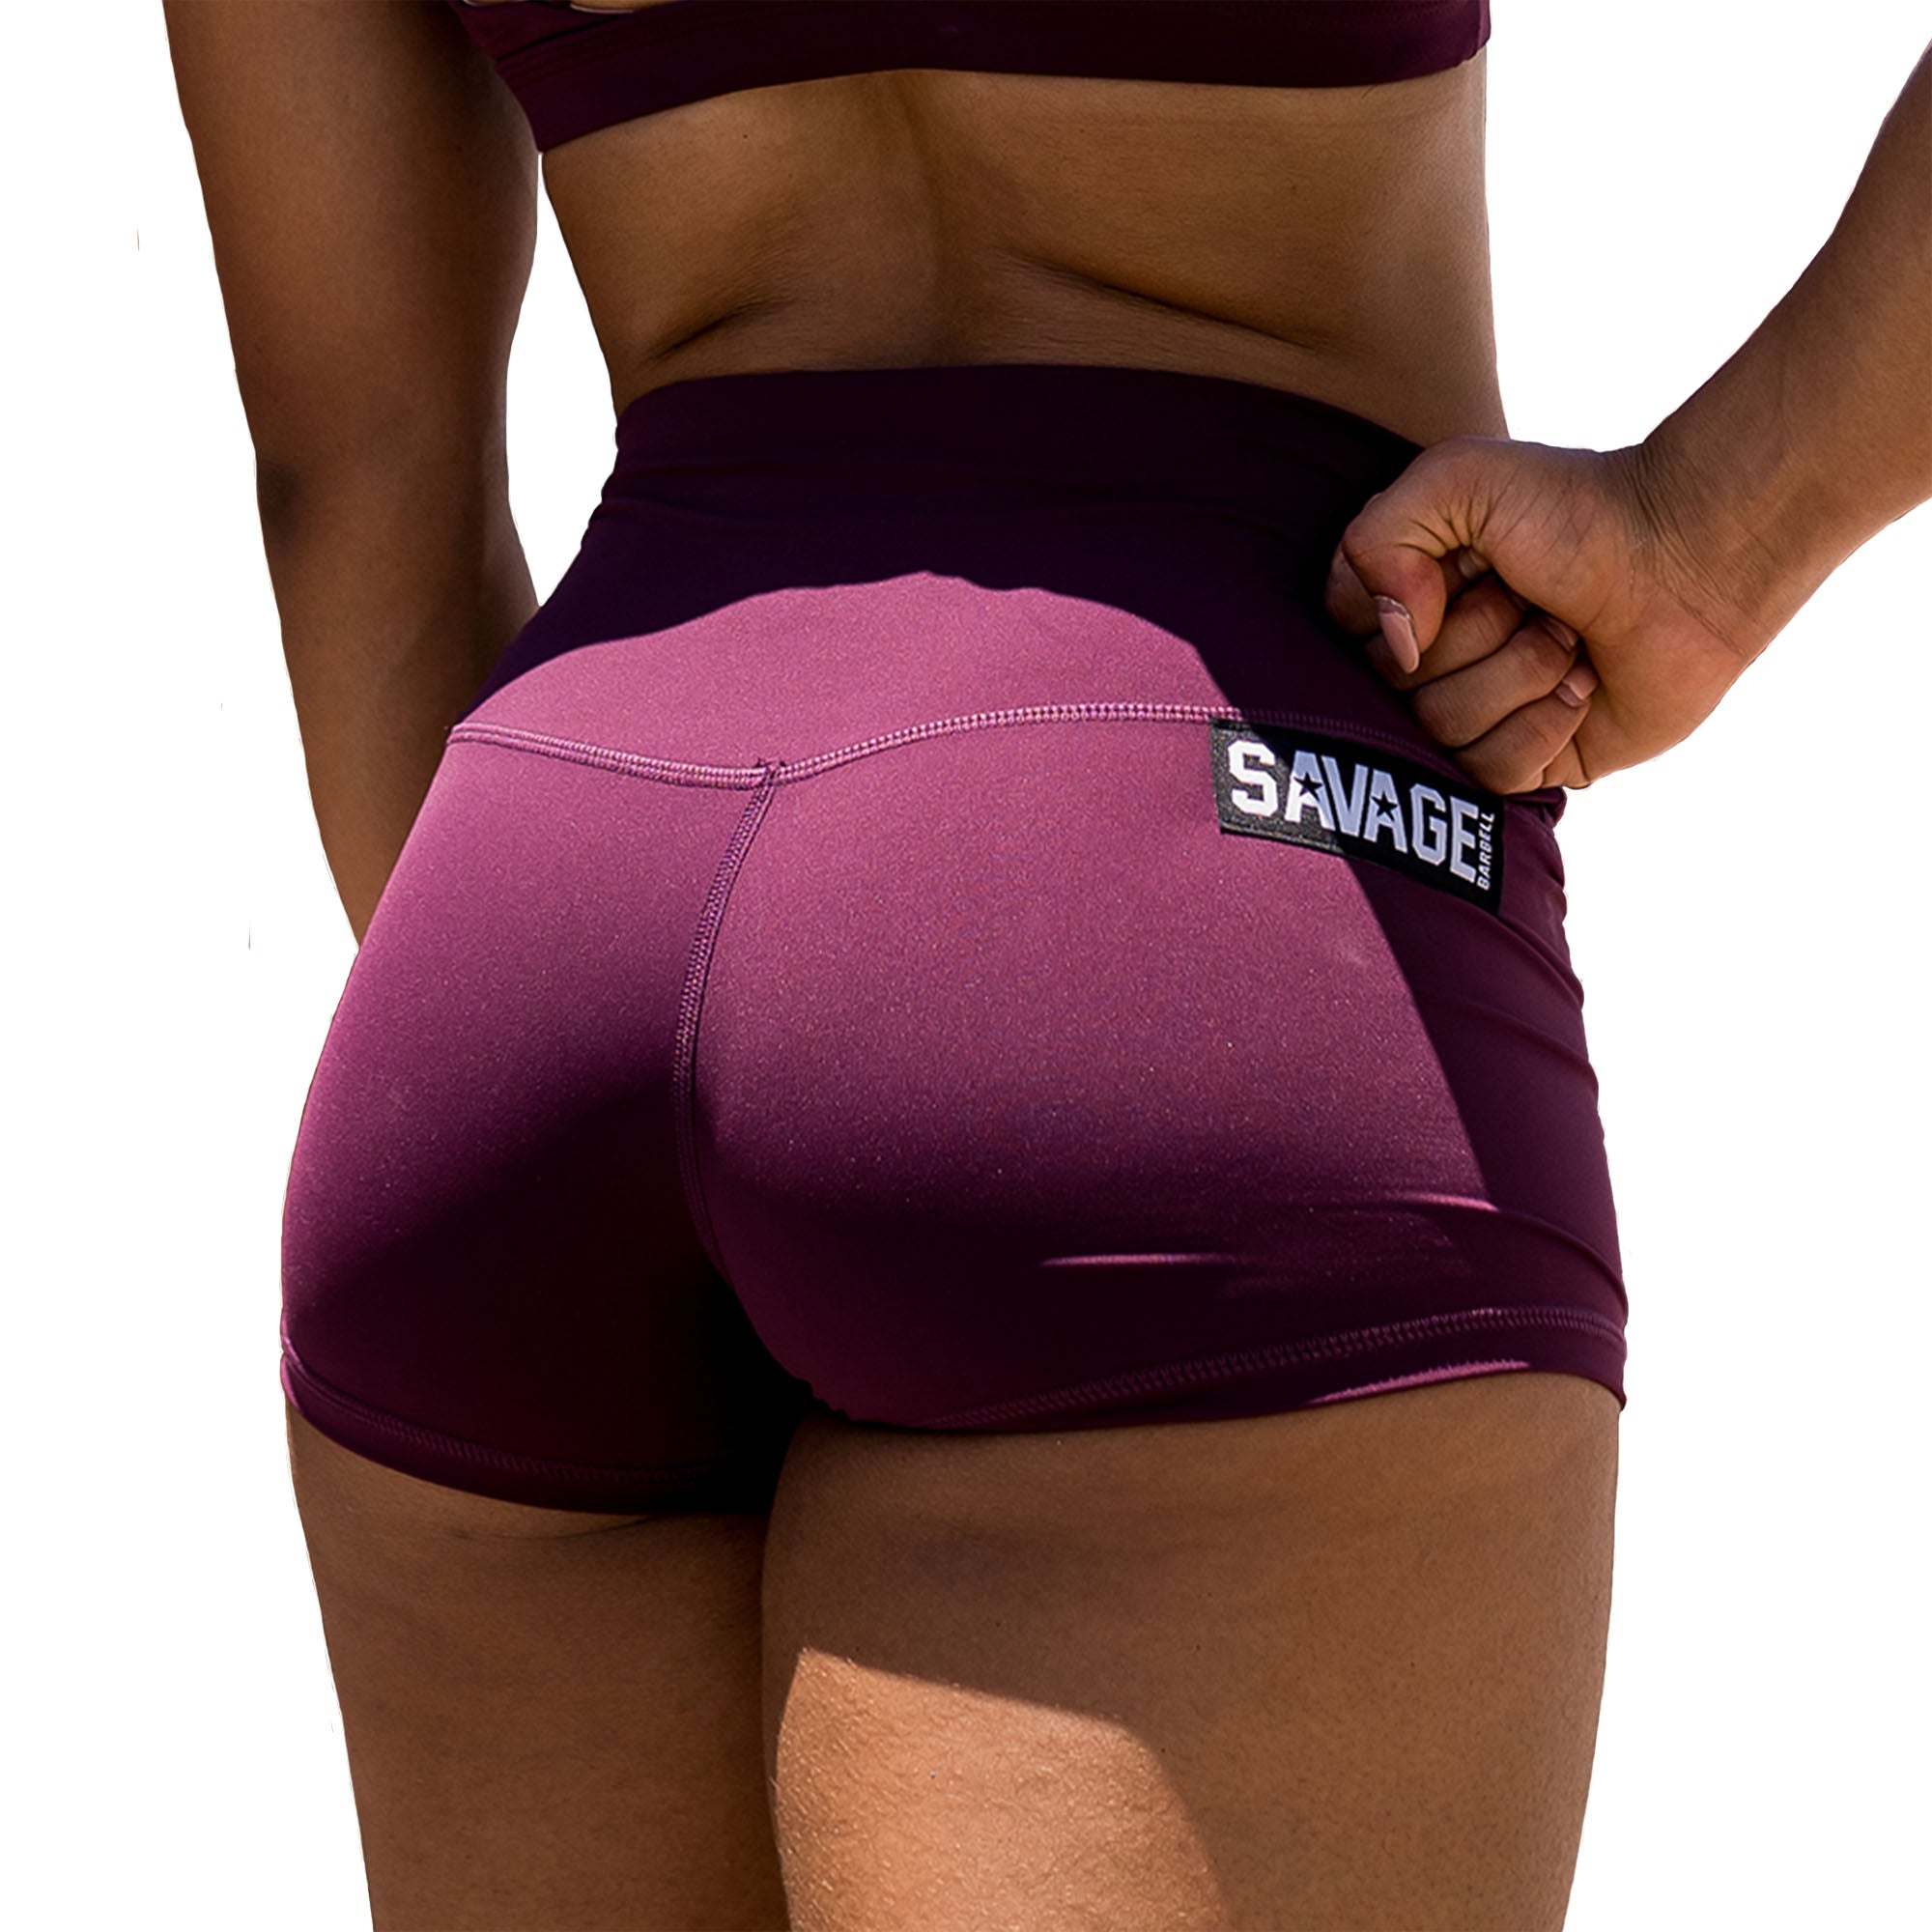 Release Date May 20th - High Waist Booty Shorts - Wine - Savage Barbell Apparel